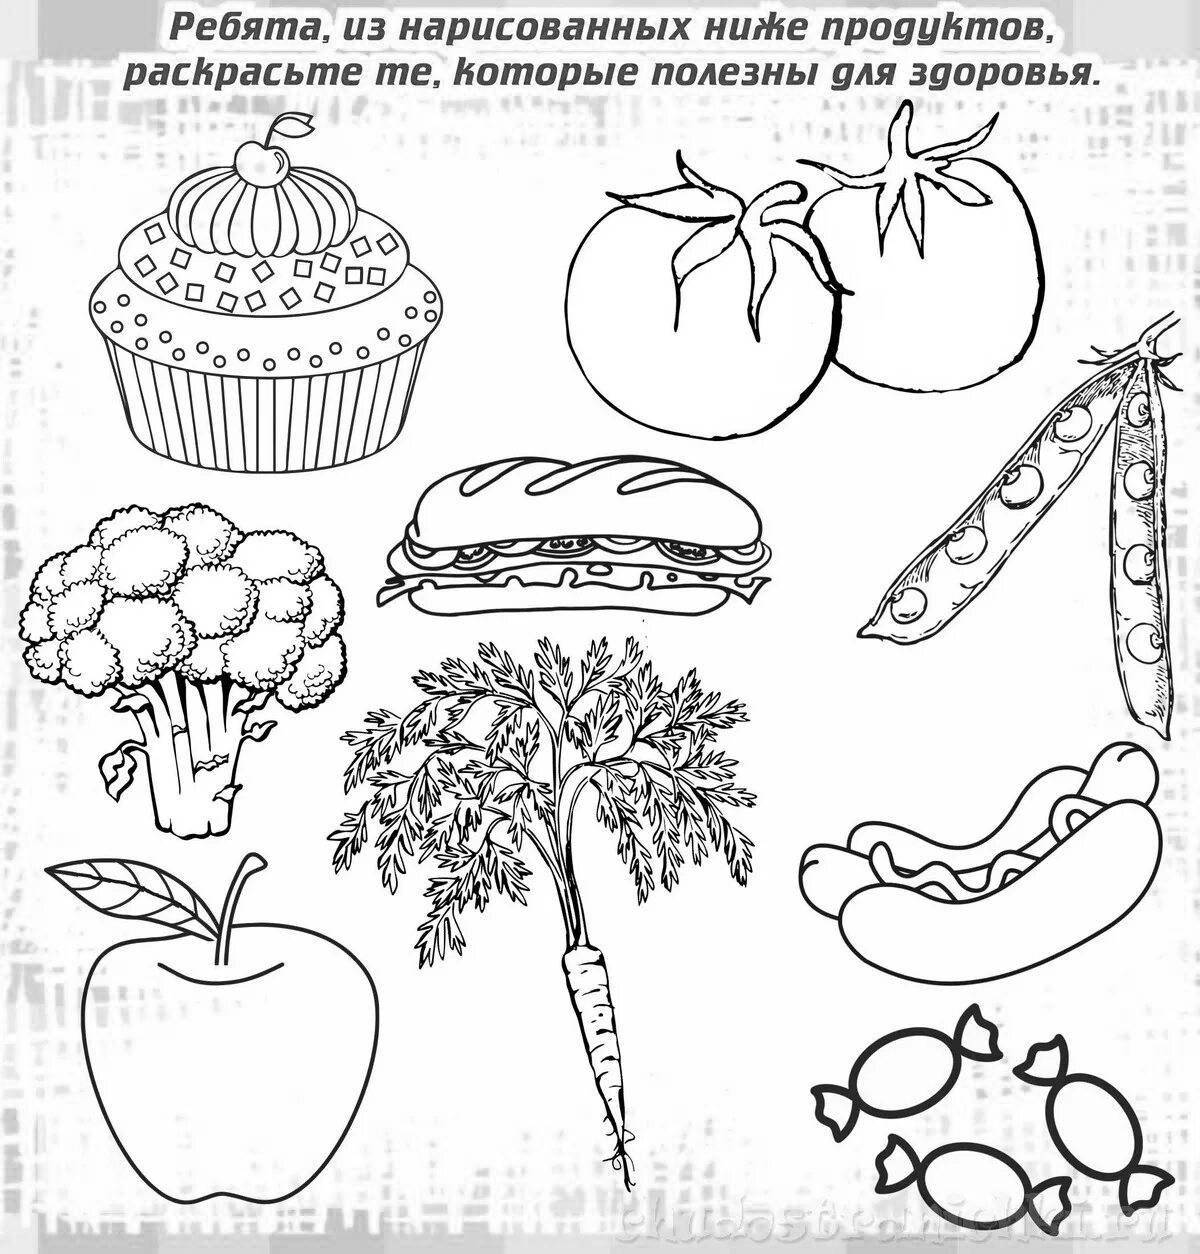 Fun healthy food coloring book for 4-5 year olds